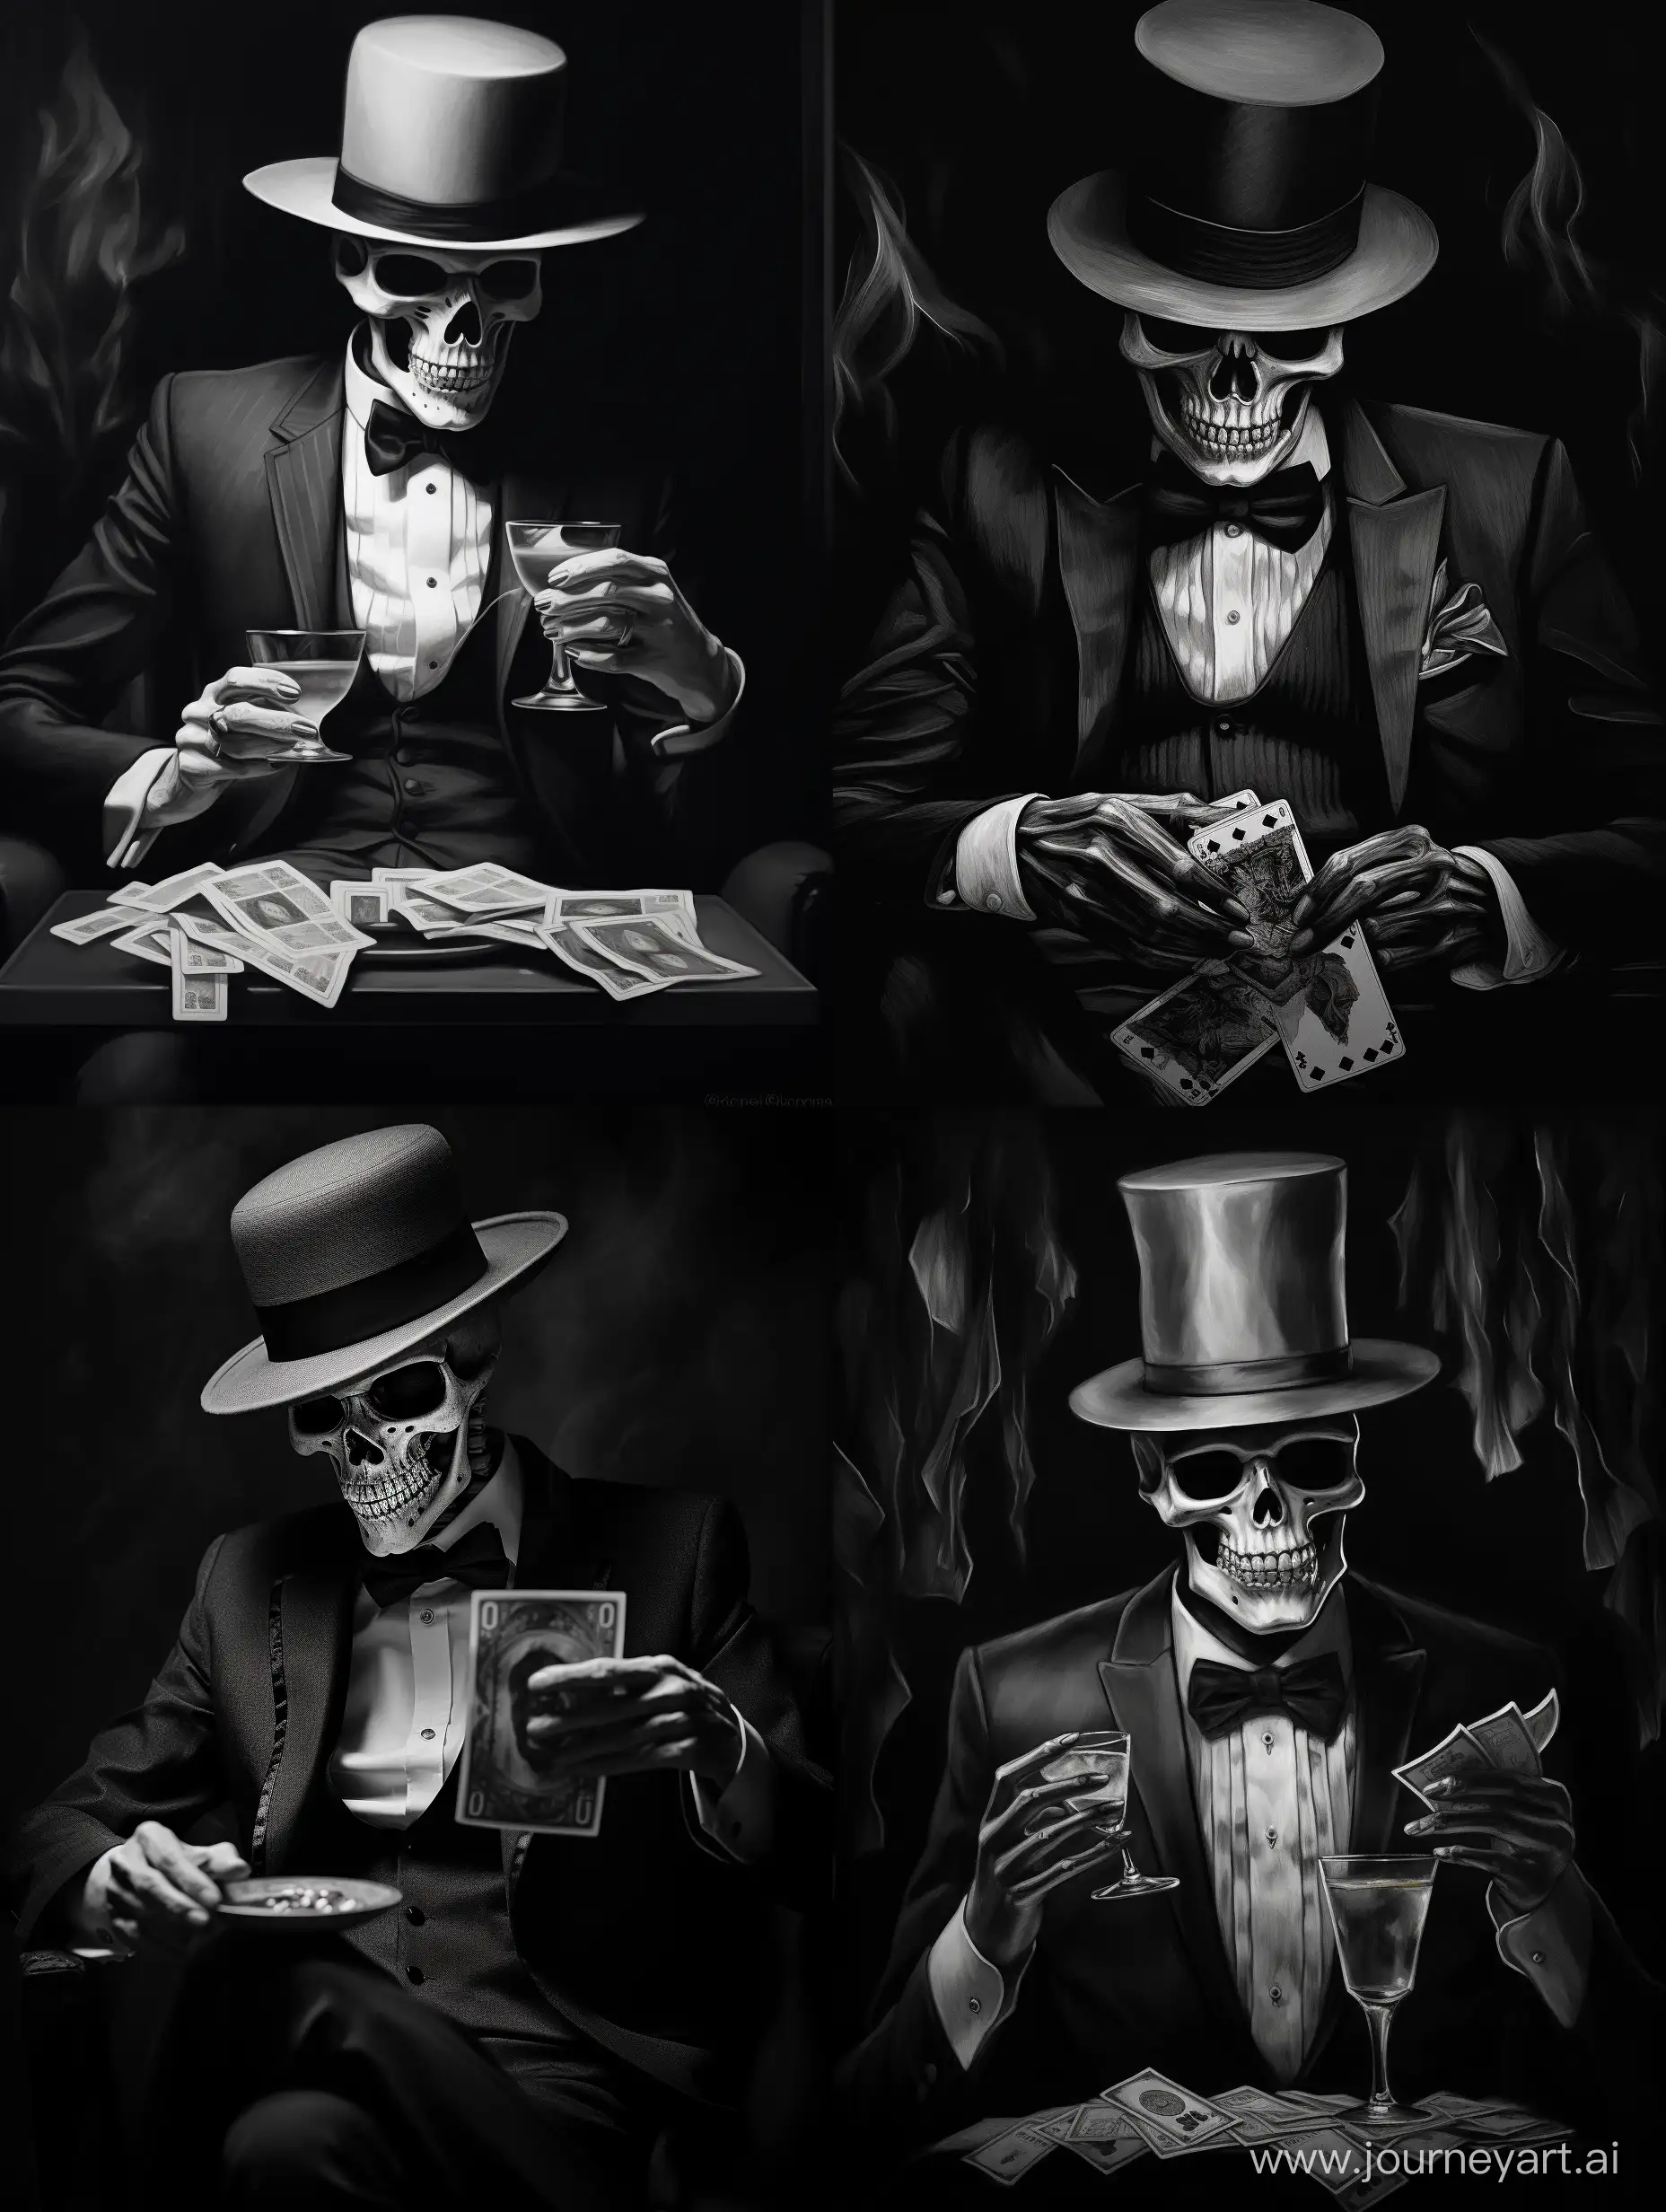 Skeletal-Gambler-in-Noir-Bar-Stylishly-Suited-with-Cigar-and-Cards